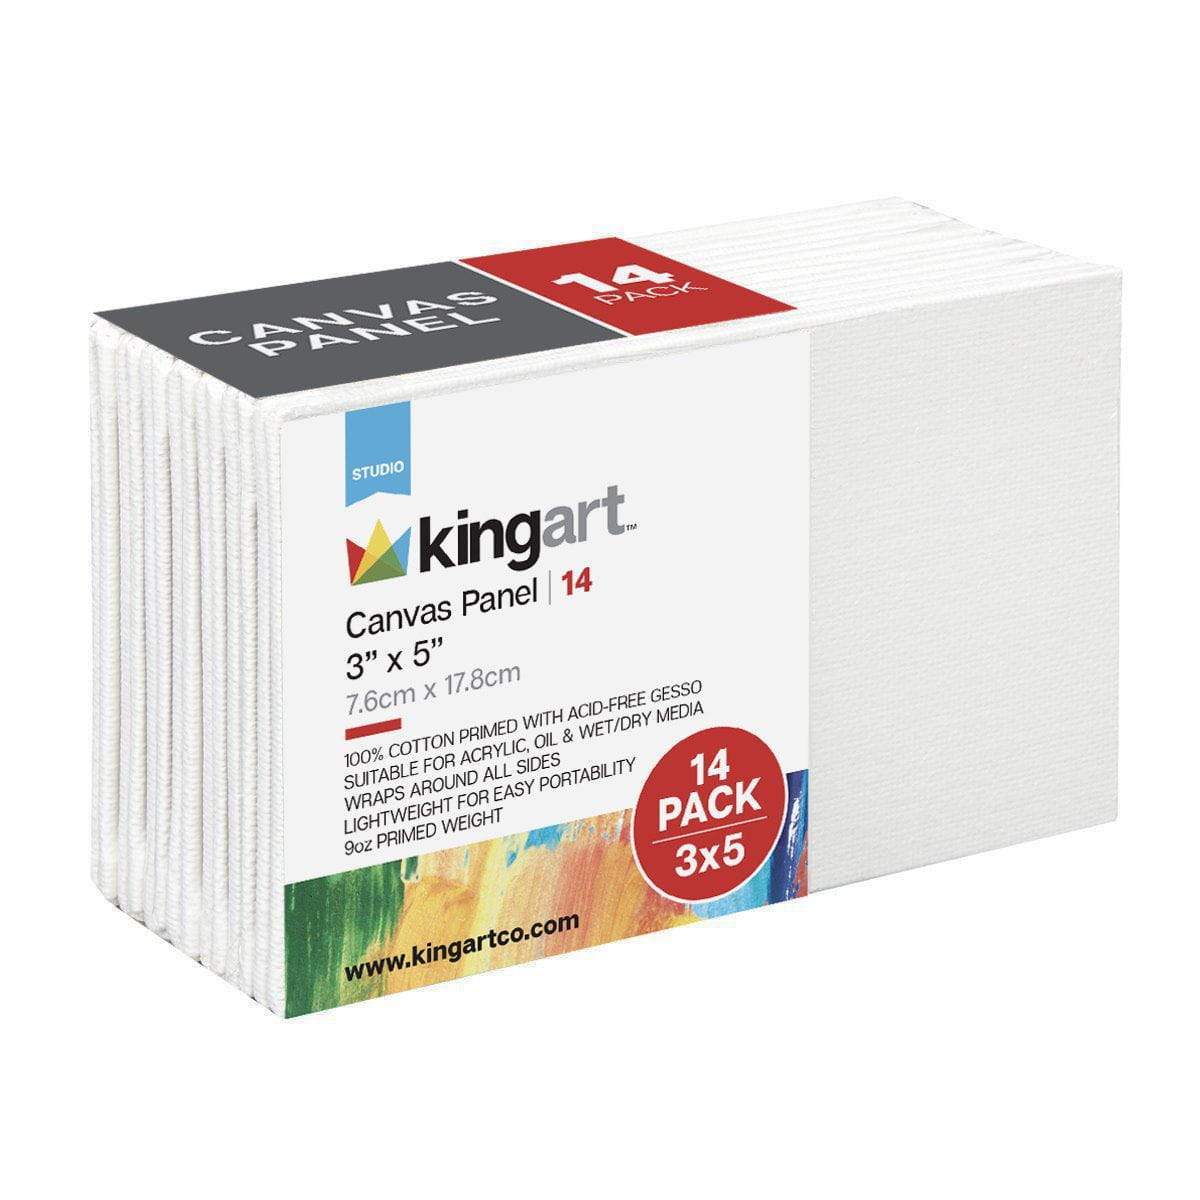 Kingart 825-14 White 10 x 10 Artist Canvas Boards, Value Pack of 14 Square Panels, Gesso Primed - 100% Cotton, Art Supplies for Oil and Acrylic